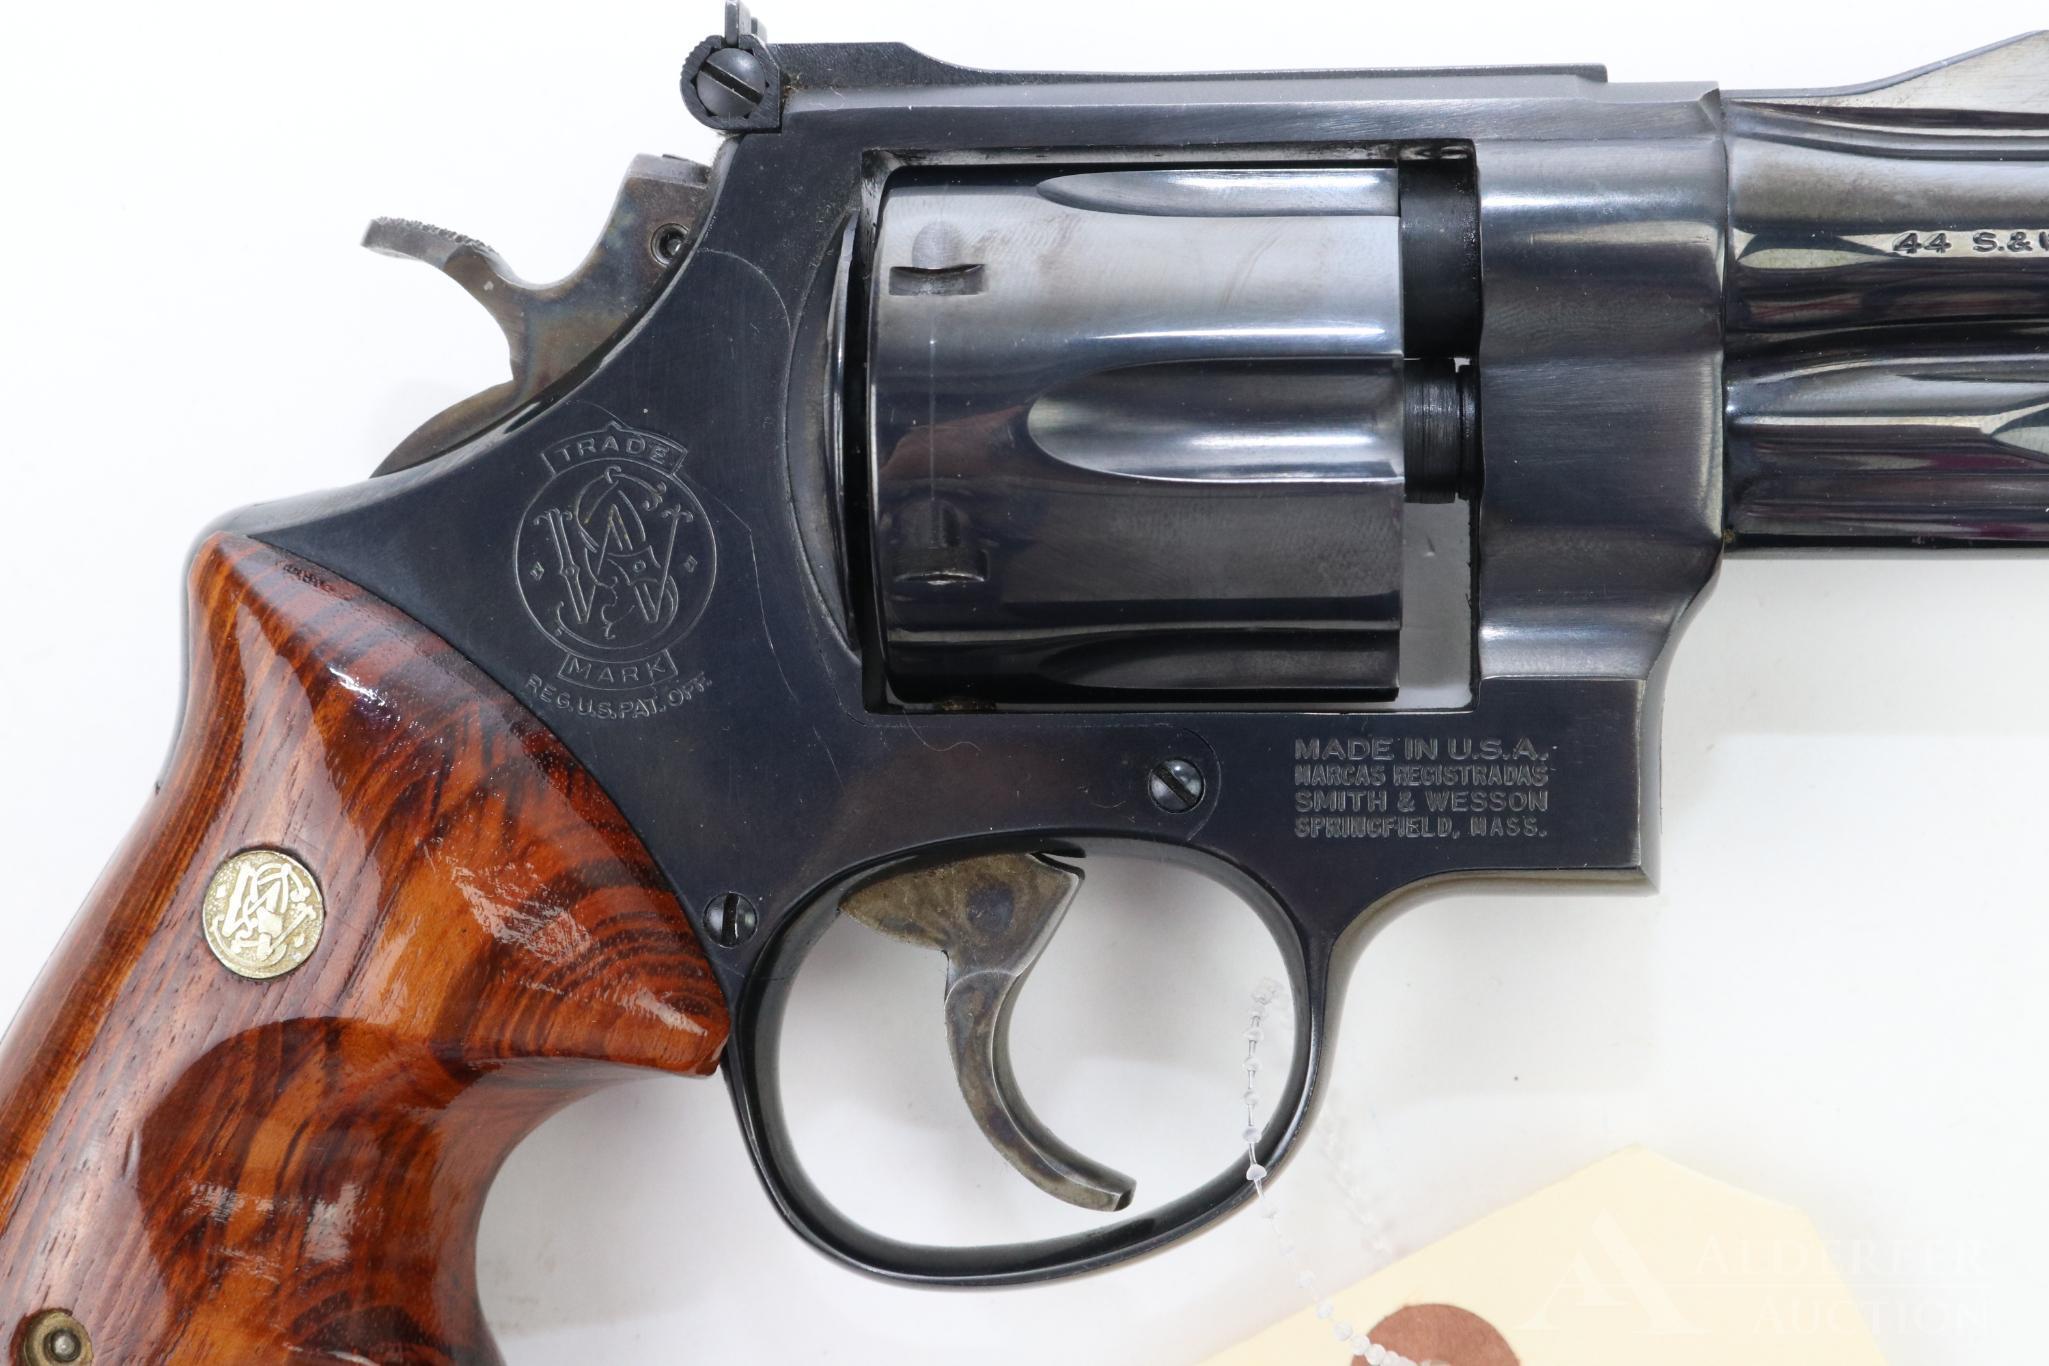 Smith & Wesson 24-3 double action revolver.